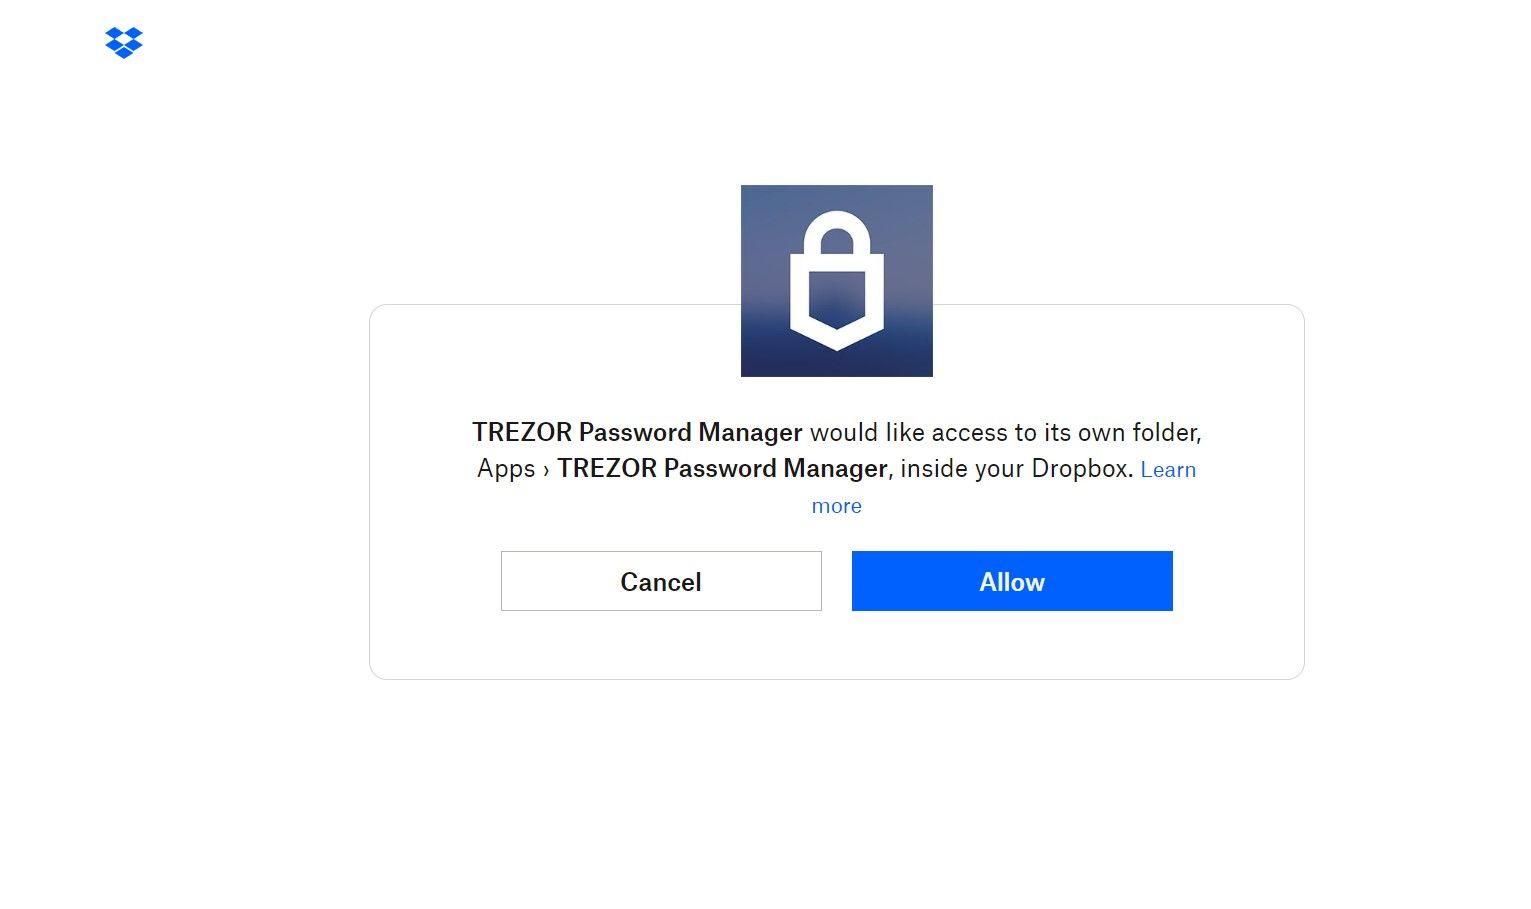 Trezor Password Manager Deprecated: What to Do Now